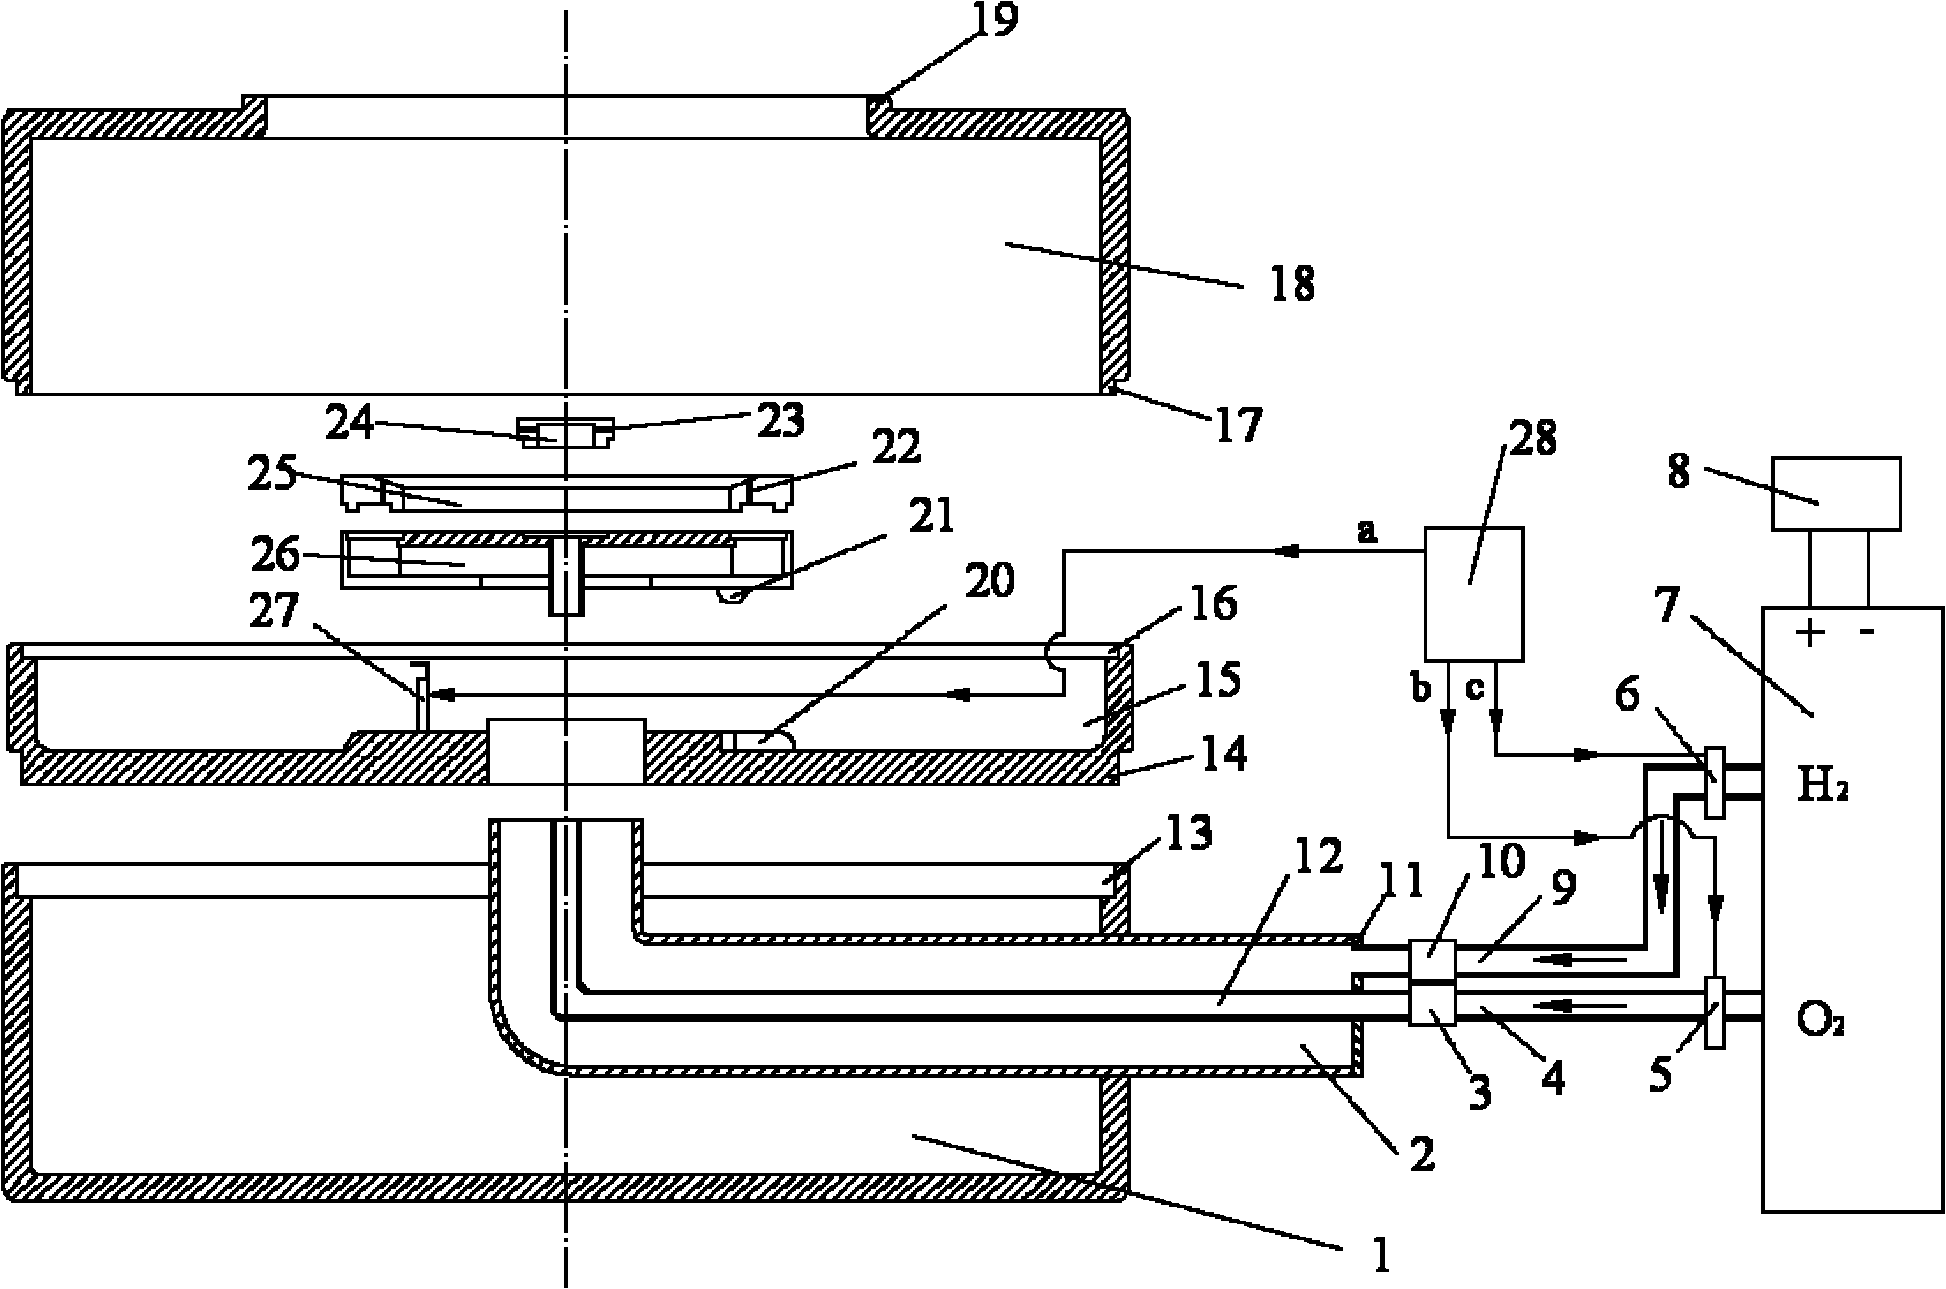 Hydrogen and oxygen combustion cooker based on oxyhydrogen production machine